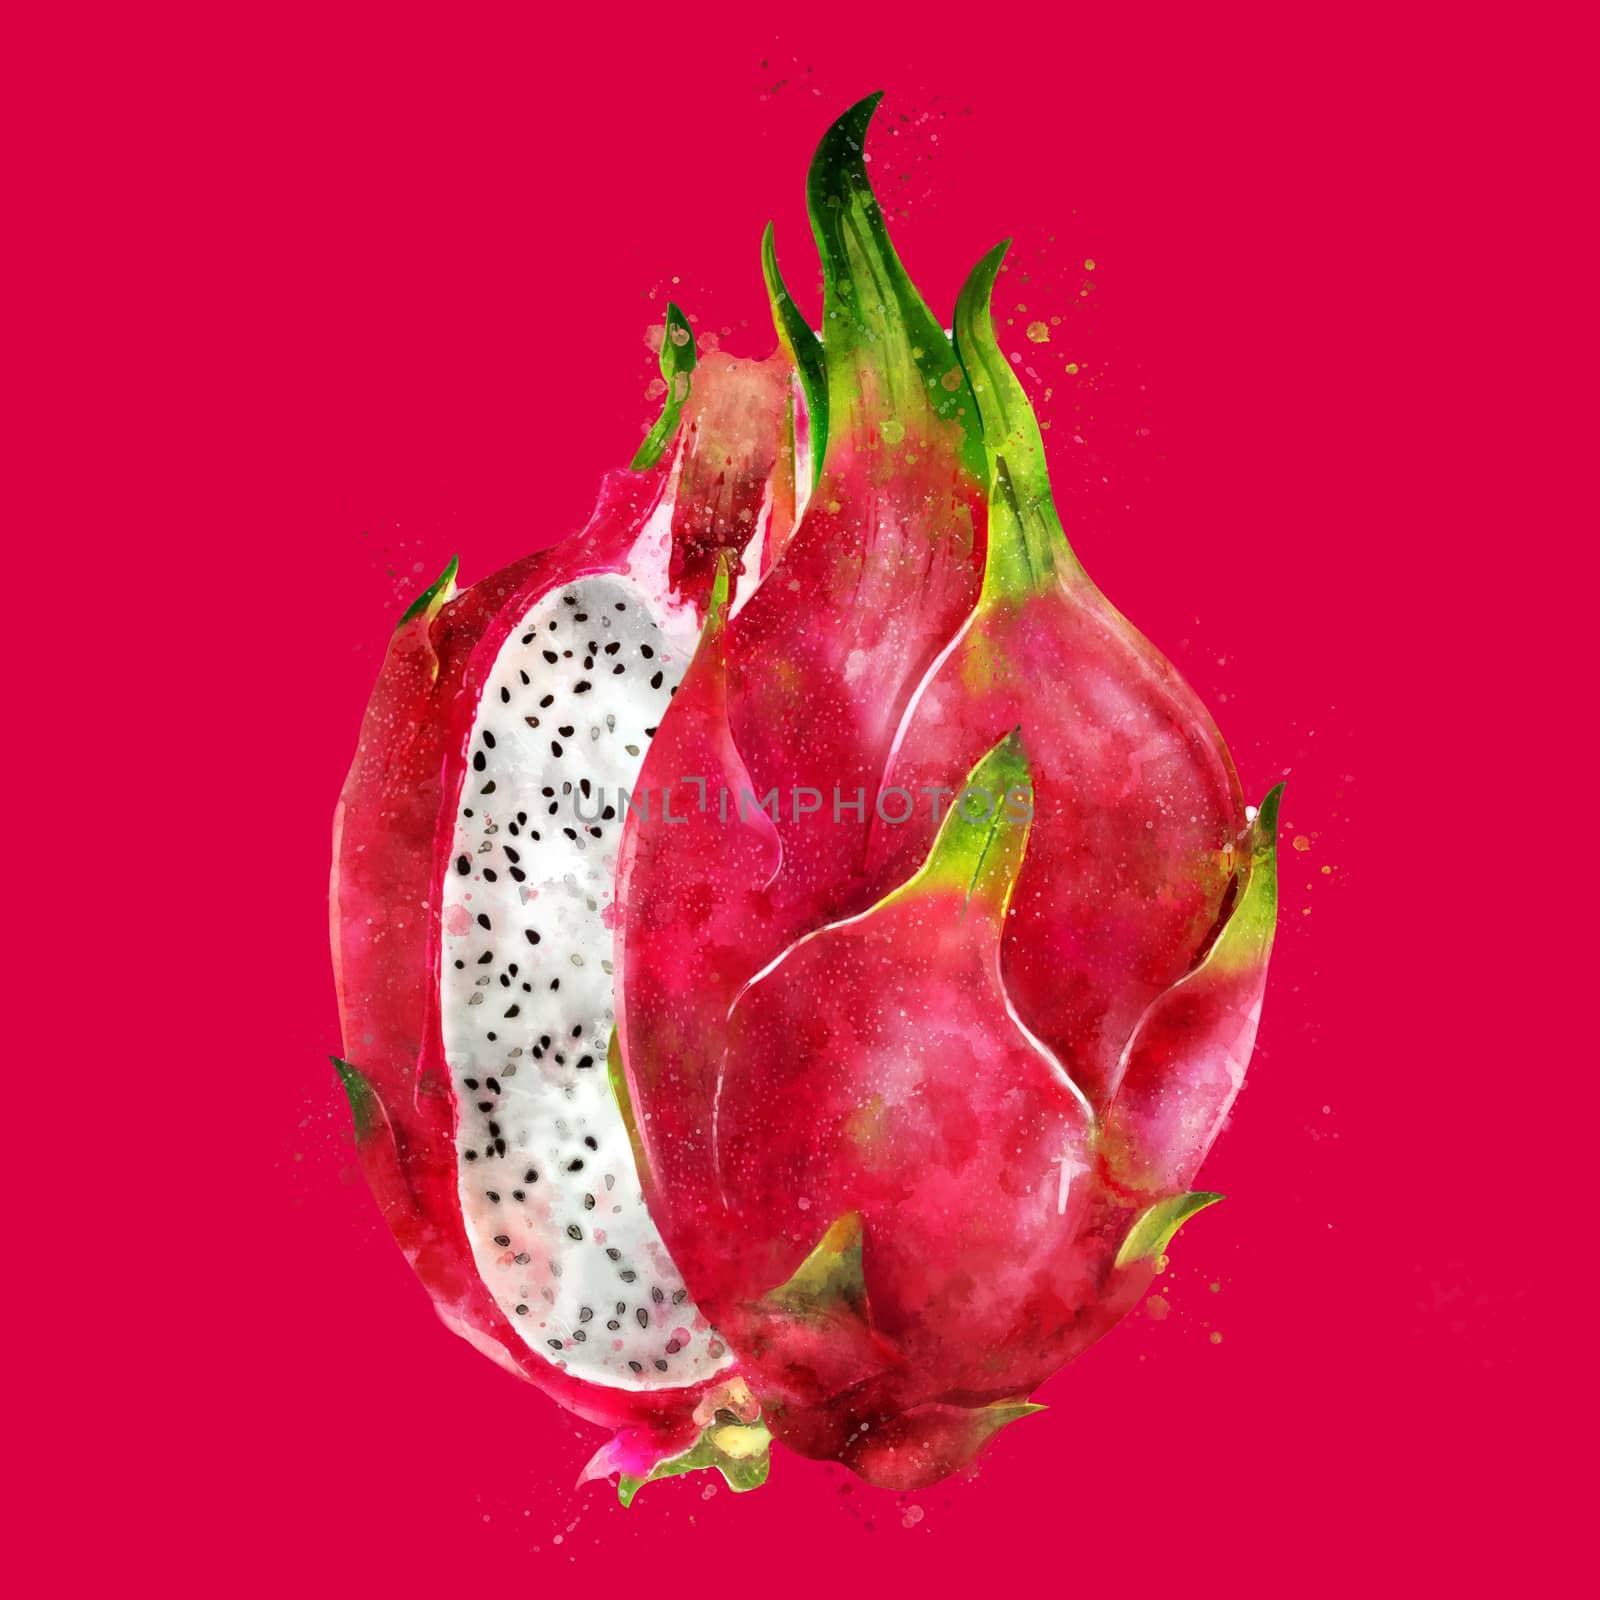 Dragon Fruit on red background. Watercolor illustration by ConceptCafe